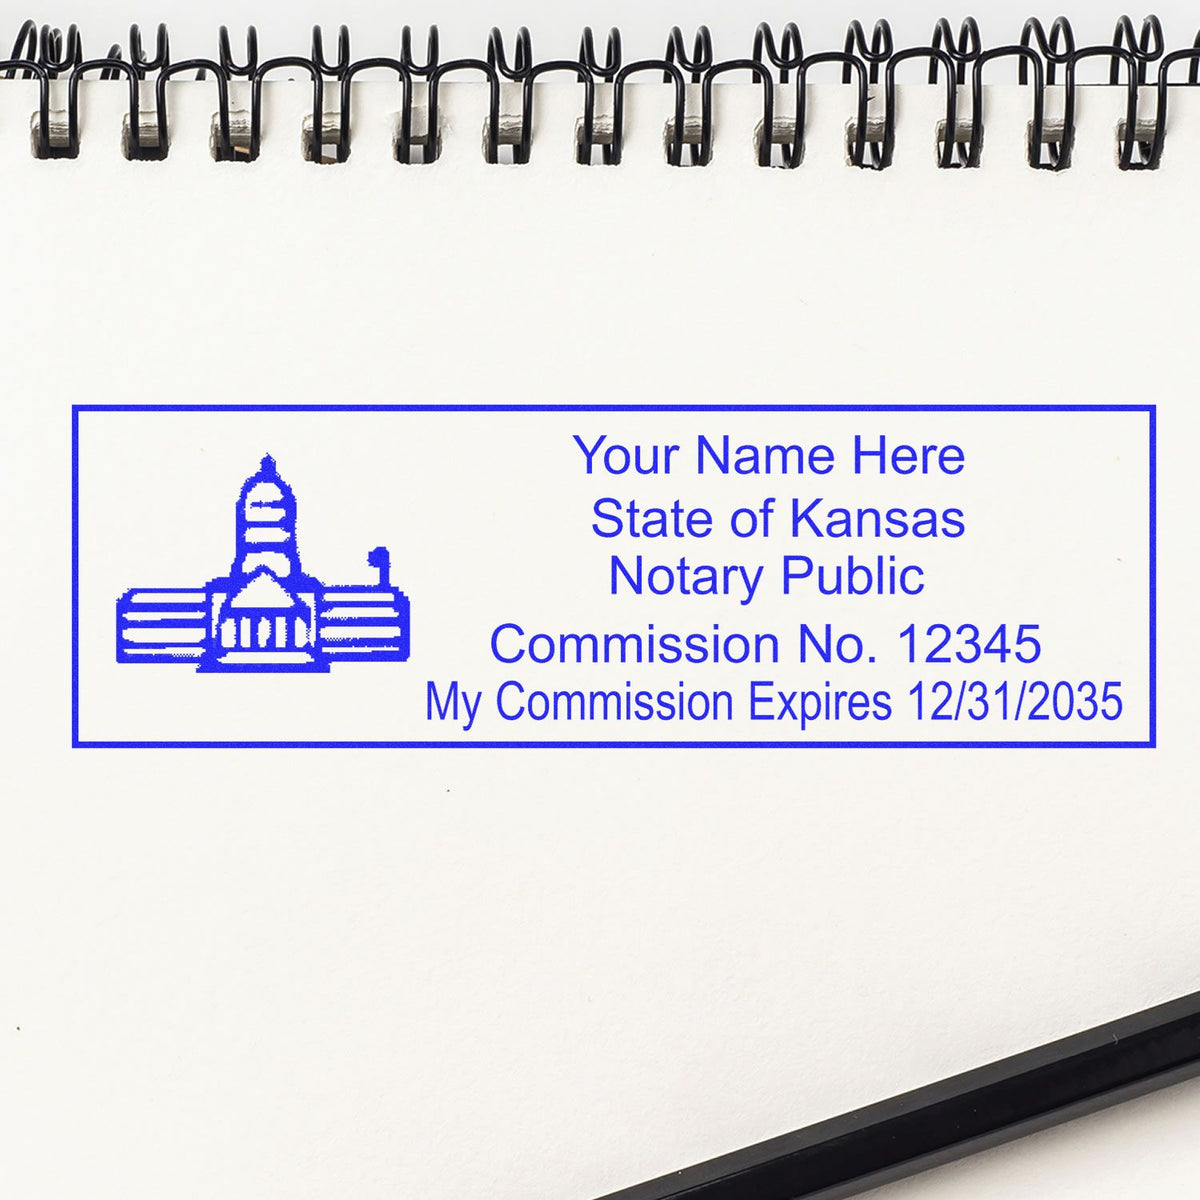 The PSI Kansas Notary Stamp stamp impression comes to life with a crisp, detailed photo on paper - showcasing true professional quality.